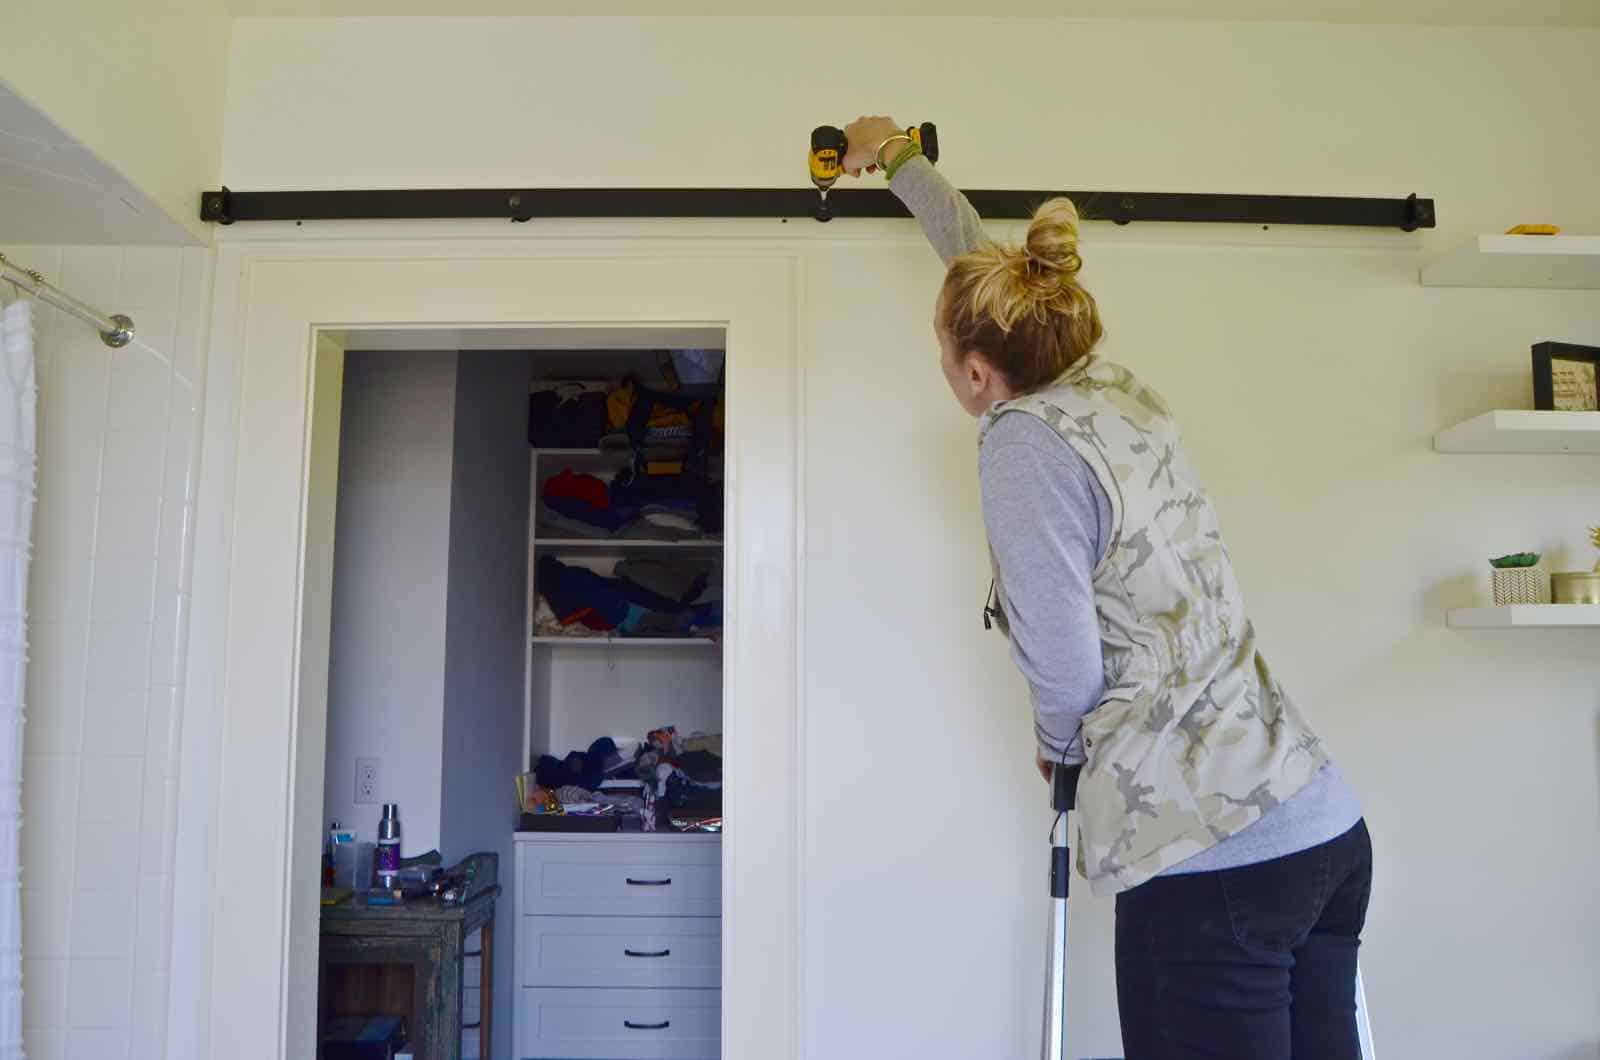 How to build a sliding barn door for under $50.